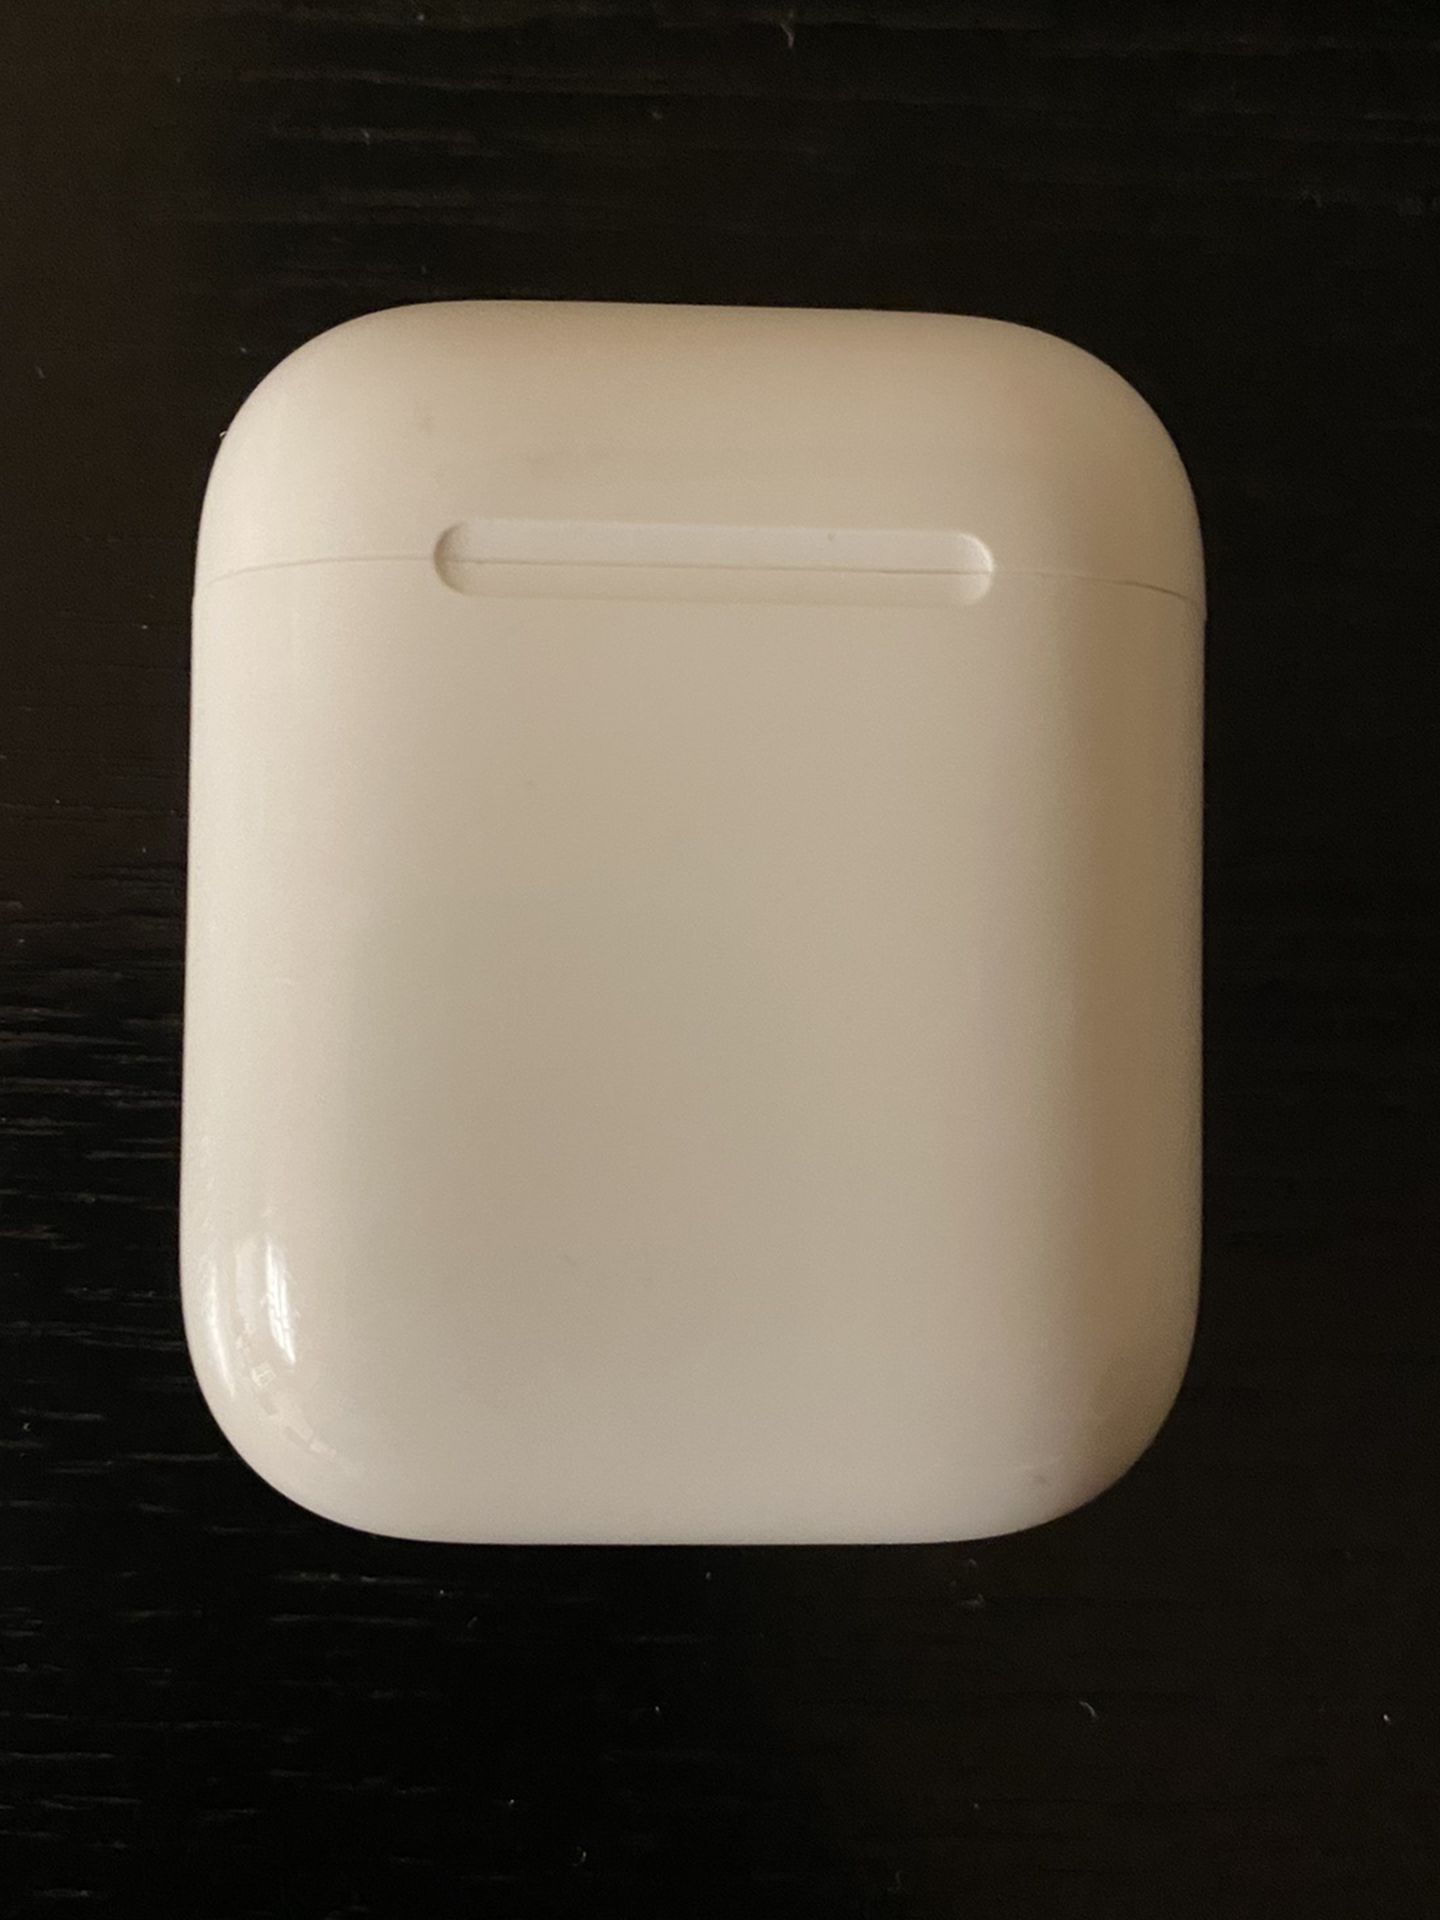 Pre-owned Apple AirPods